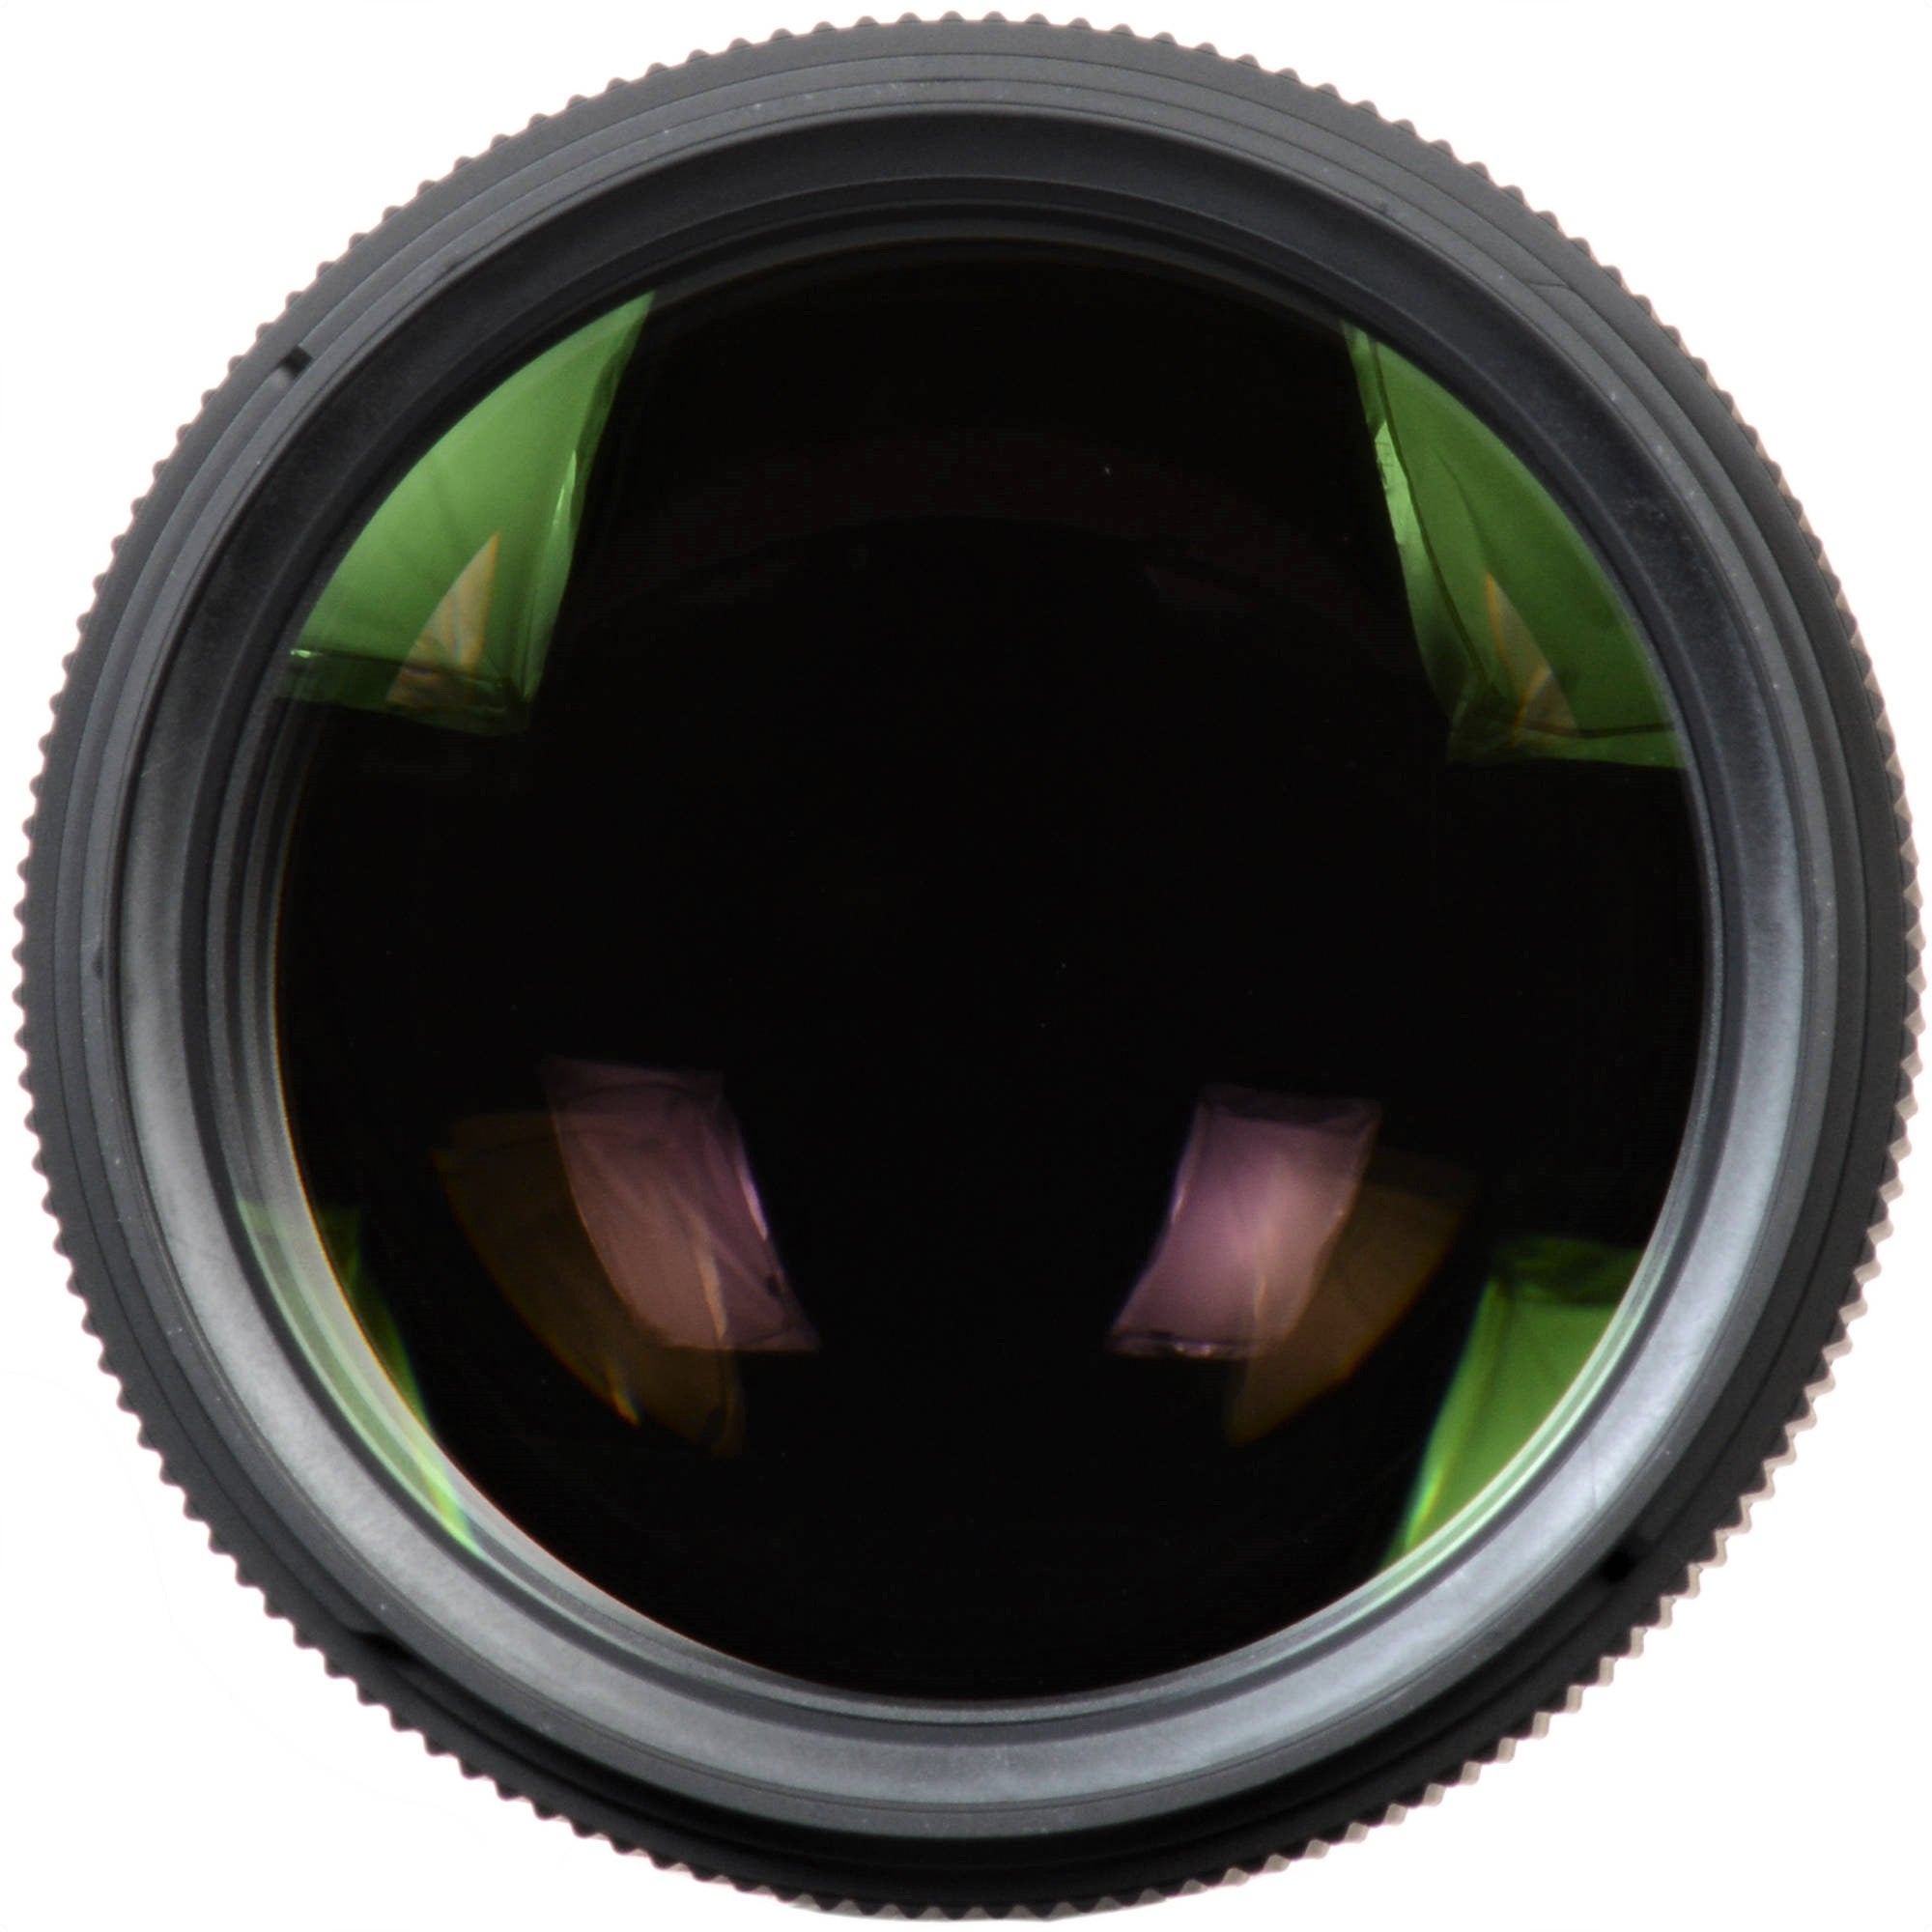 Sigma 135mm F1.8 DG HSM Art Lens for Canon EF in a Front Close-Up View